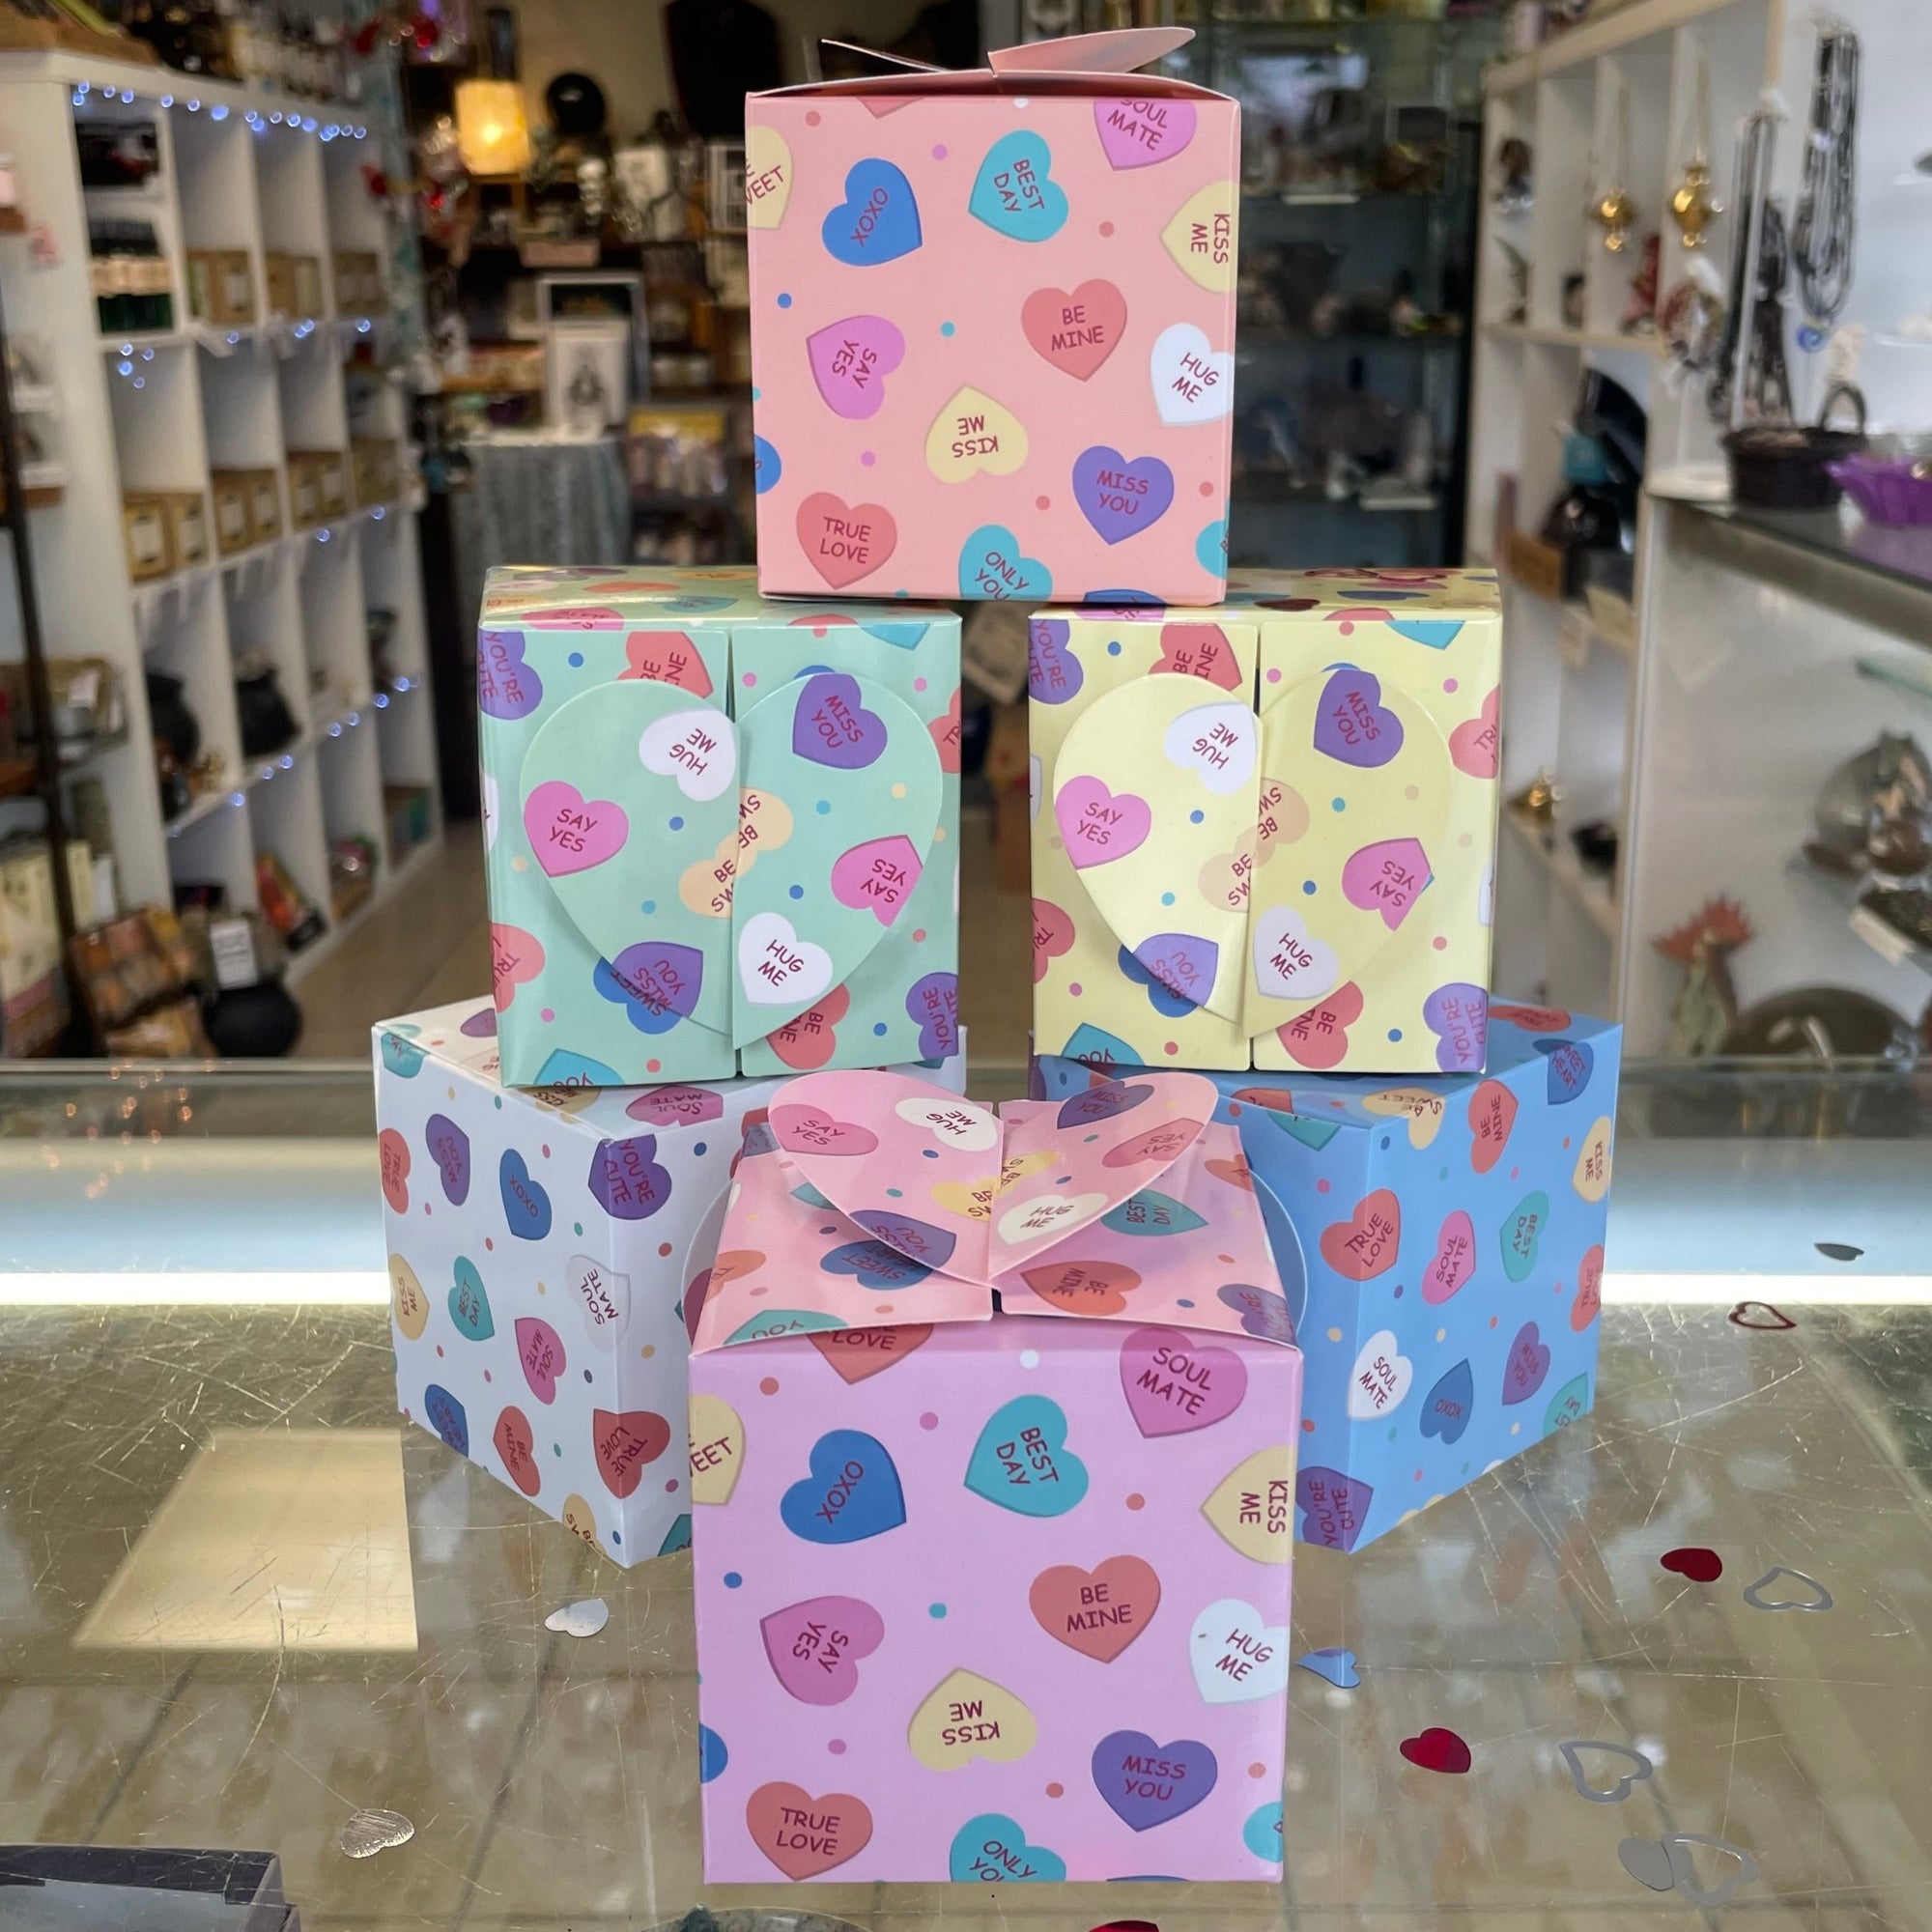 Blind Love Box: Limited Edition Mystery Valentine's Day Box